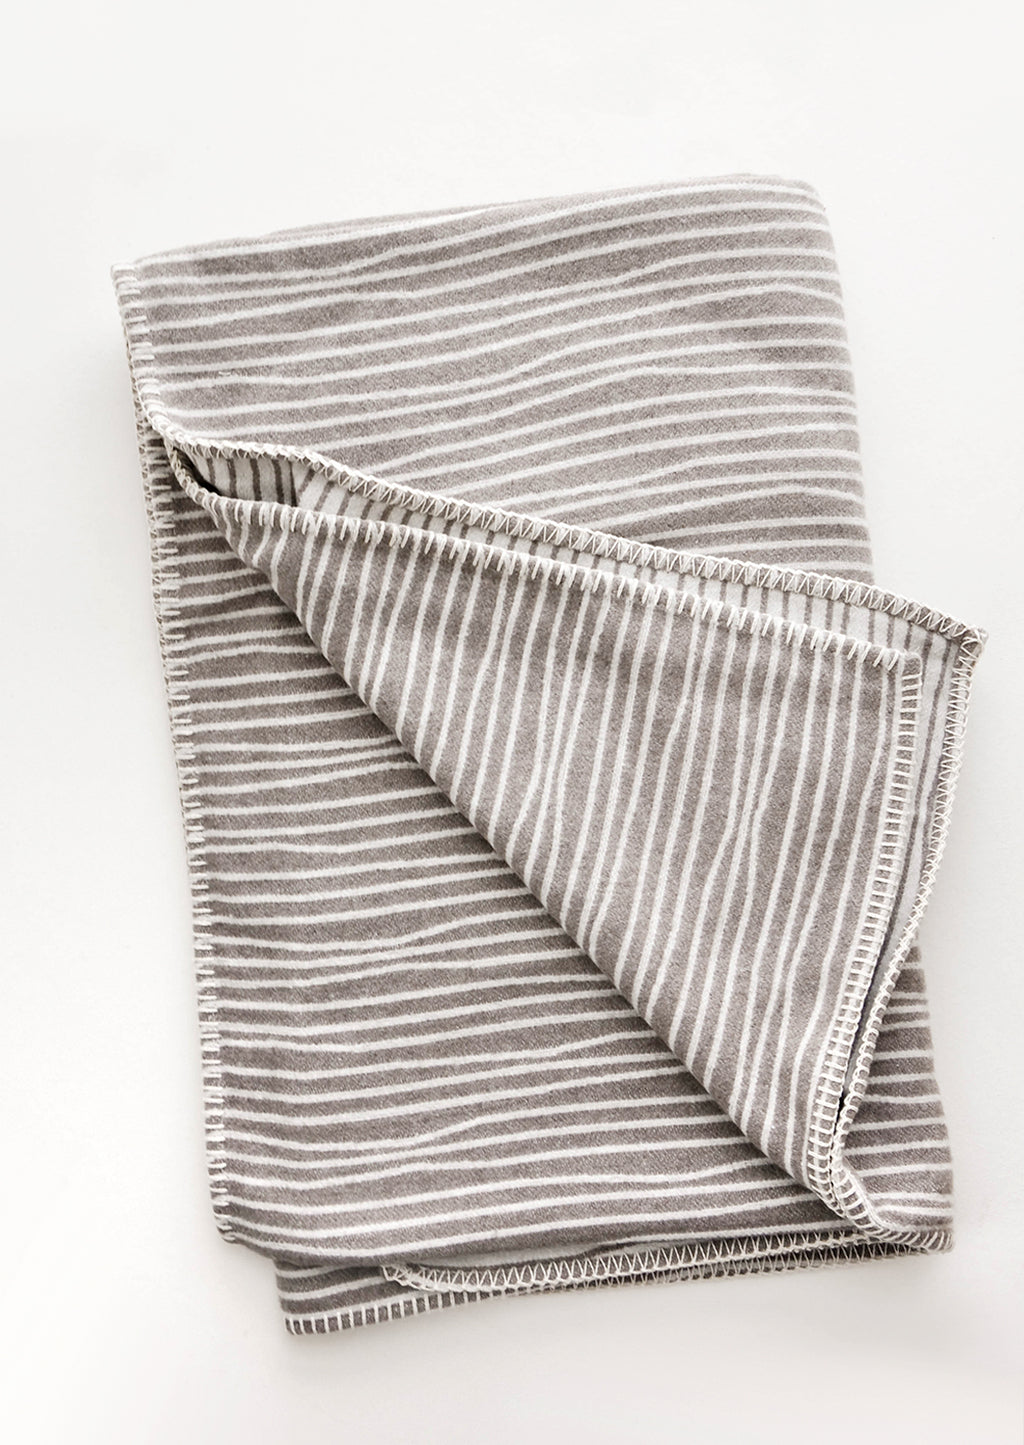 Taupe / Ivory: Plush throw blanket with allover wavy lines print in white on taupe